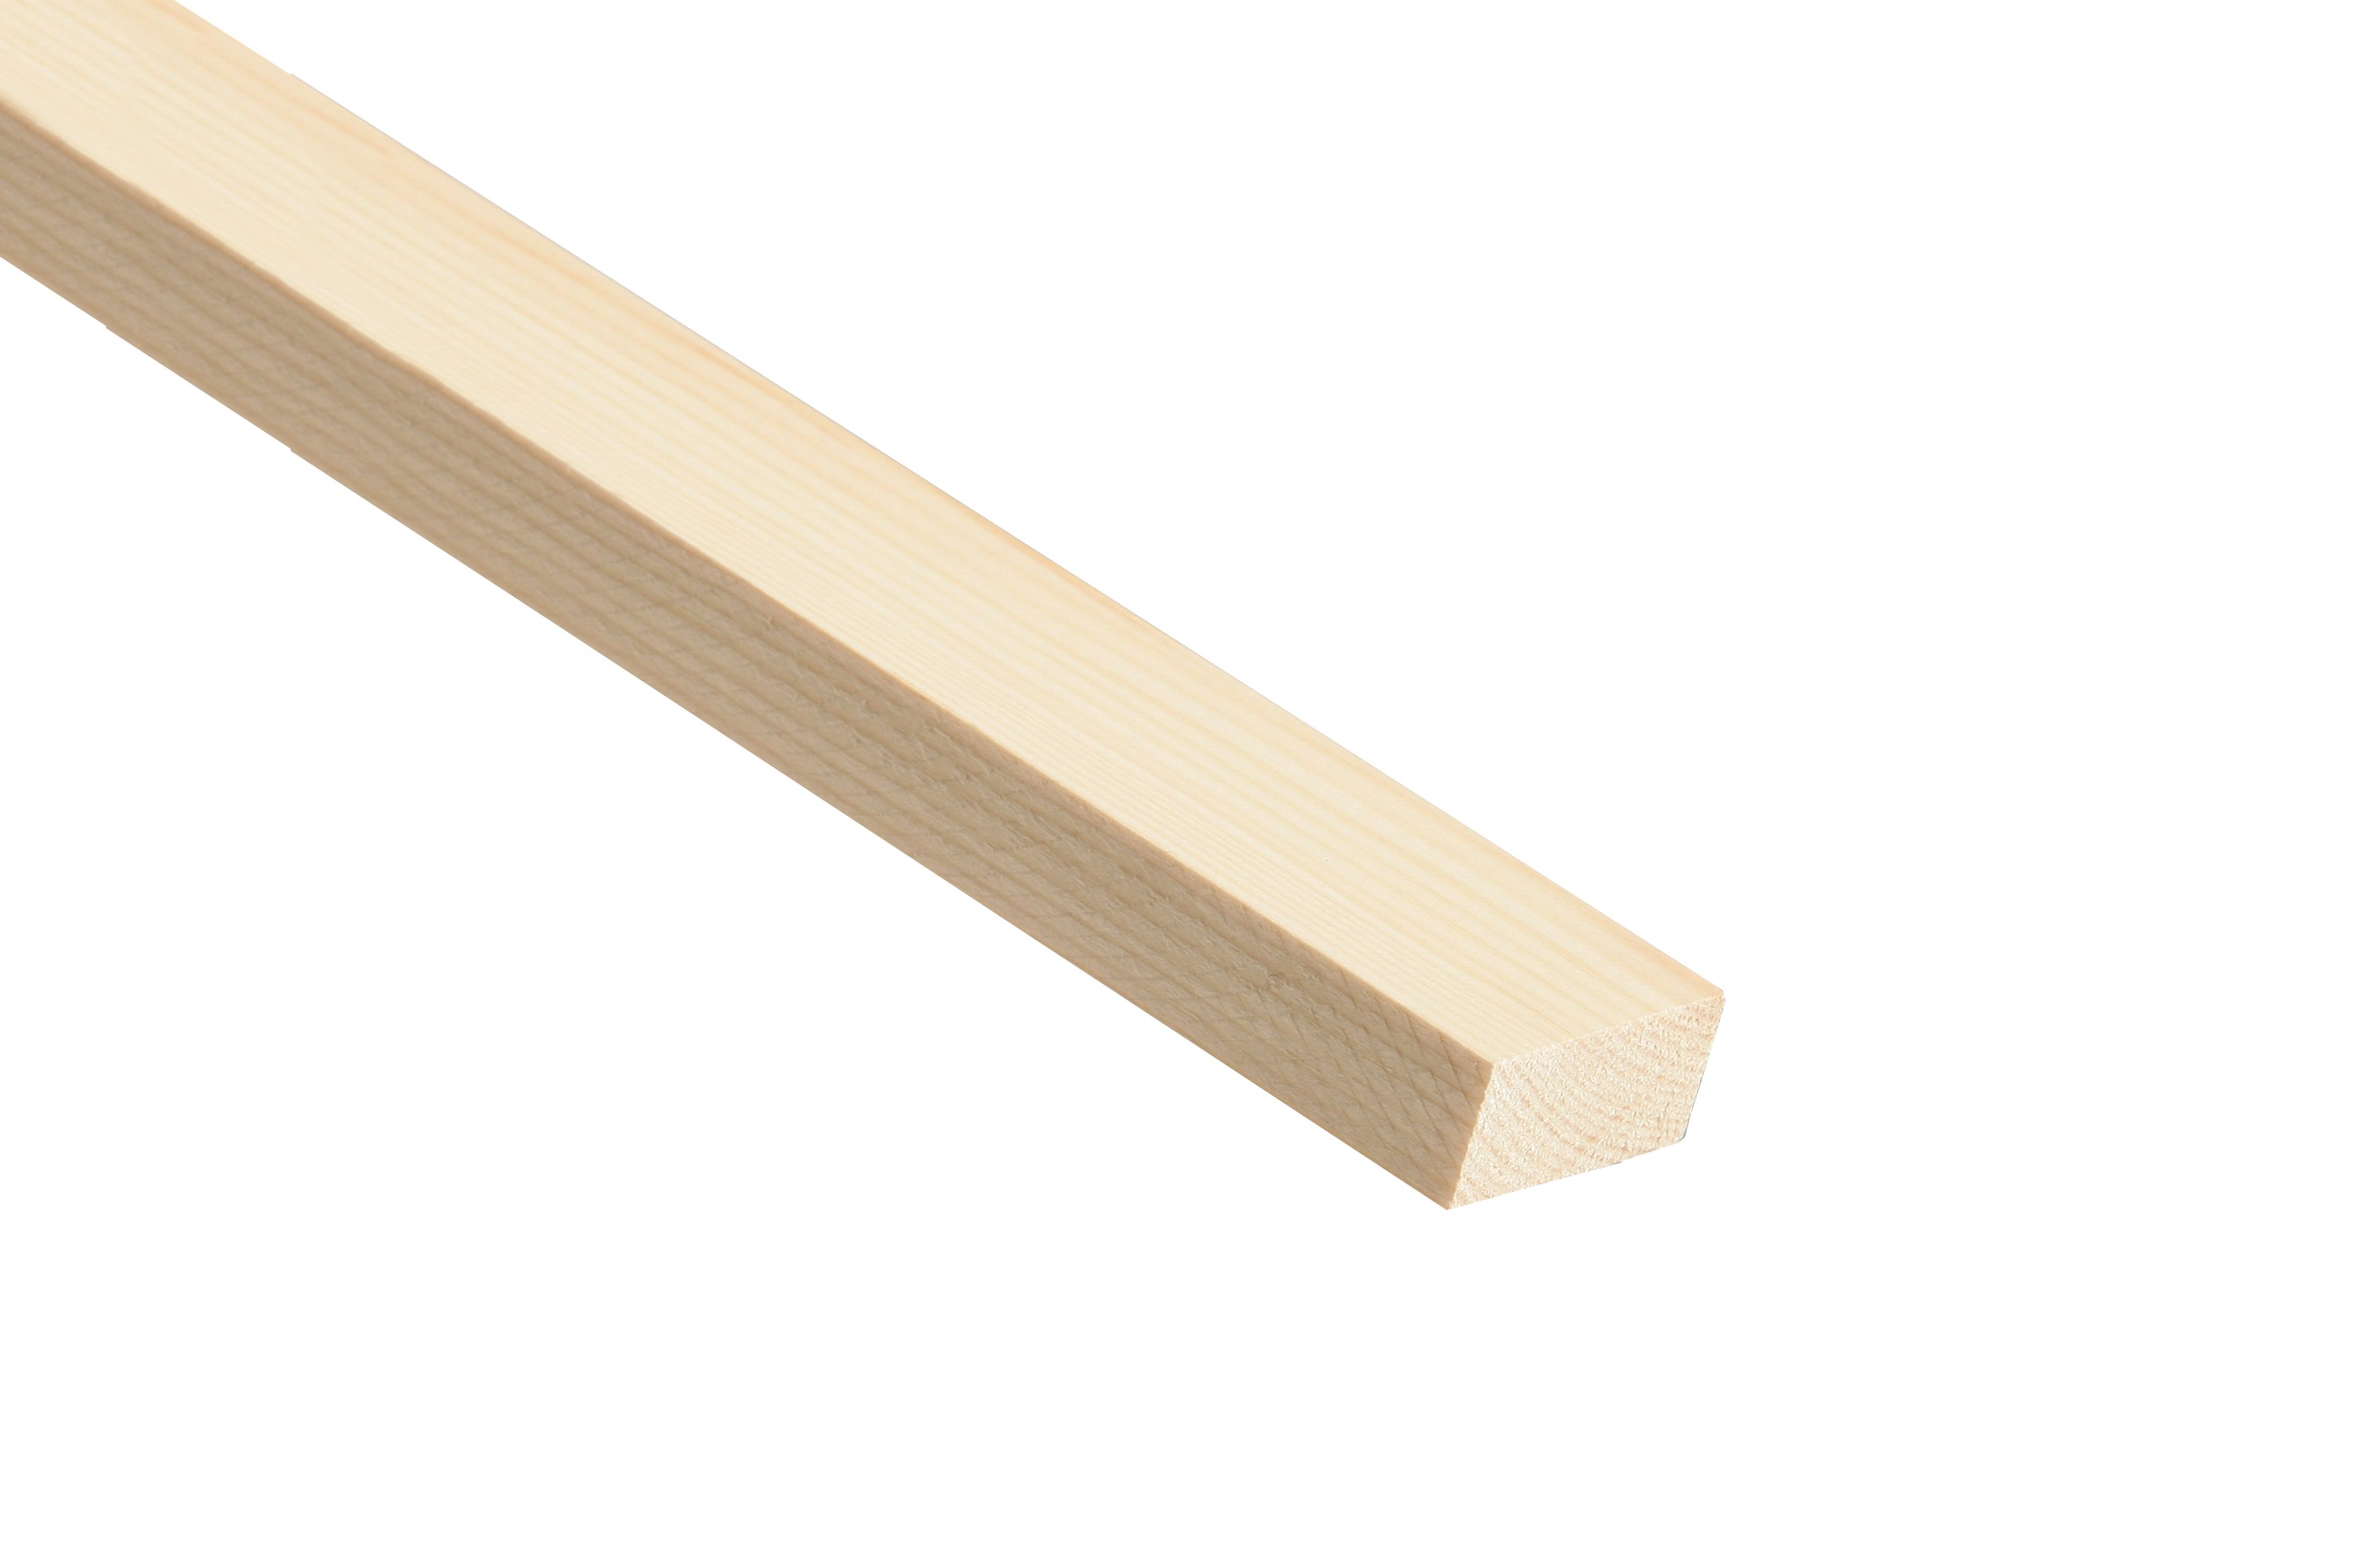 Image of Wickes Pine Stripwood Moulding (PSE) - 15 x 36 x 2400mm